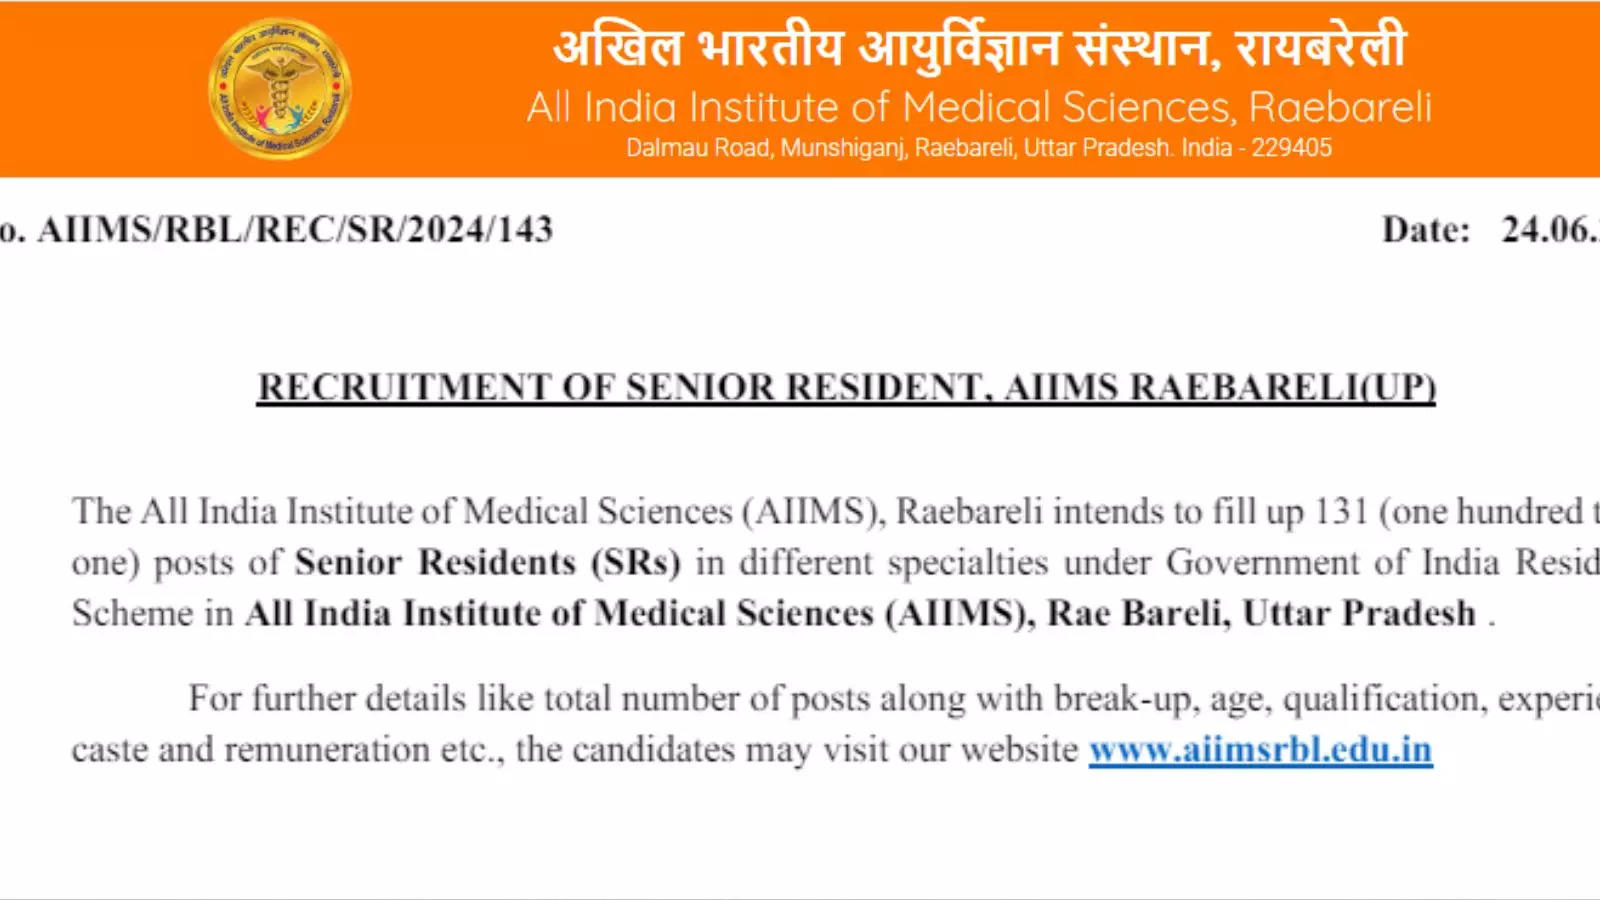 AIIMS Vacancy 2024: Vacancy for the post of Senior Resident in AIIMS, will get such a huge salary